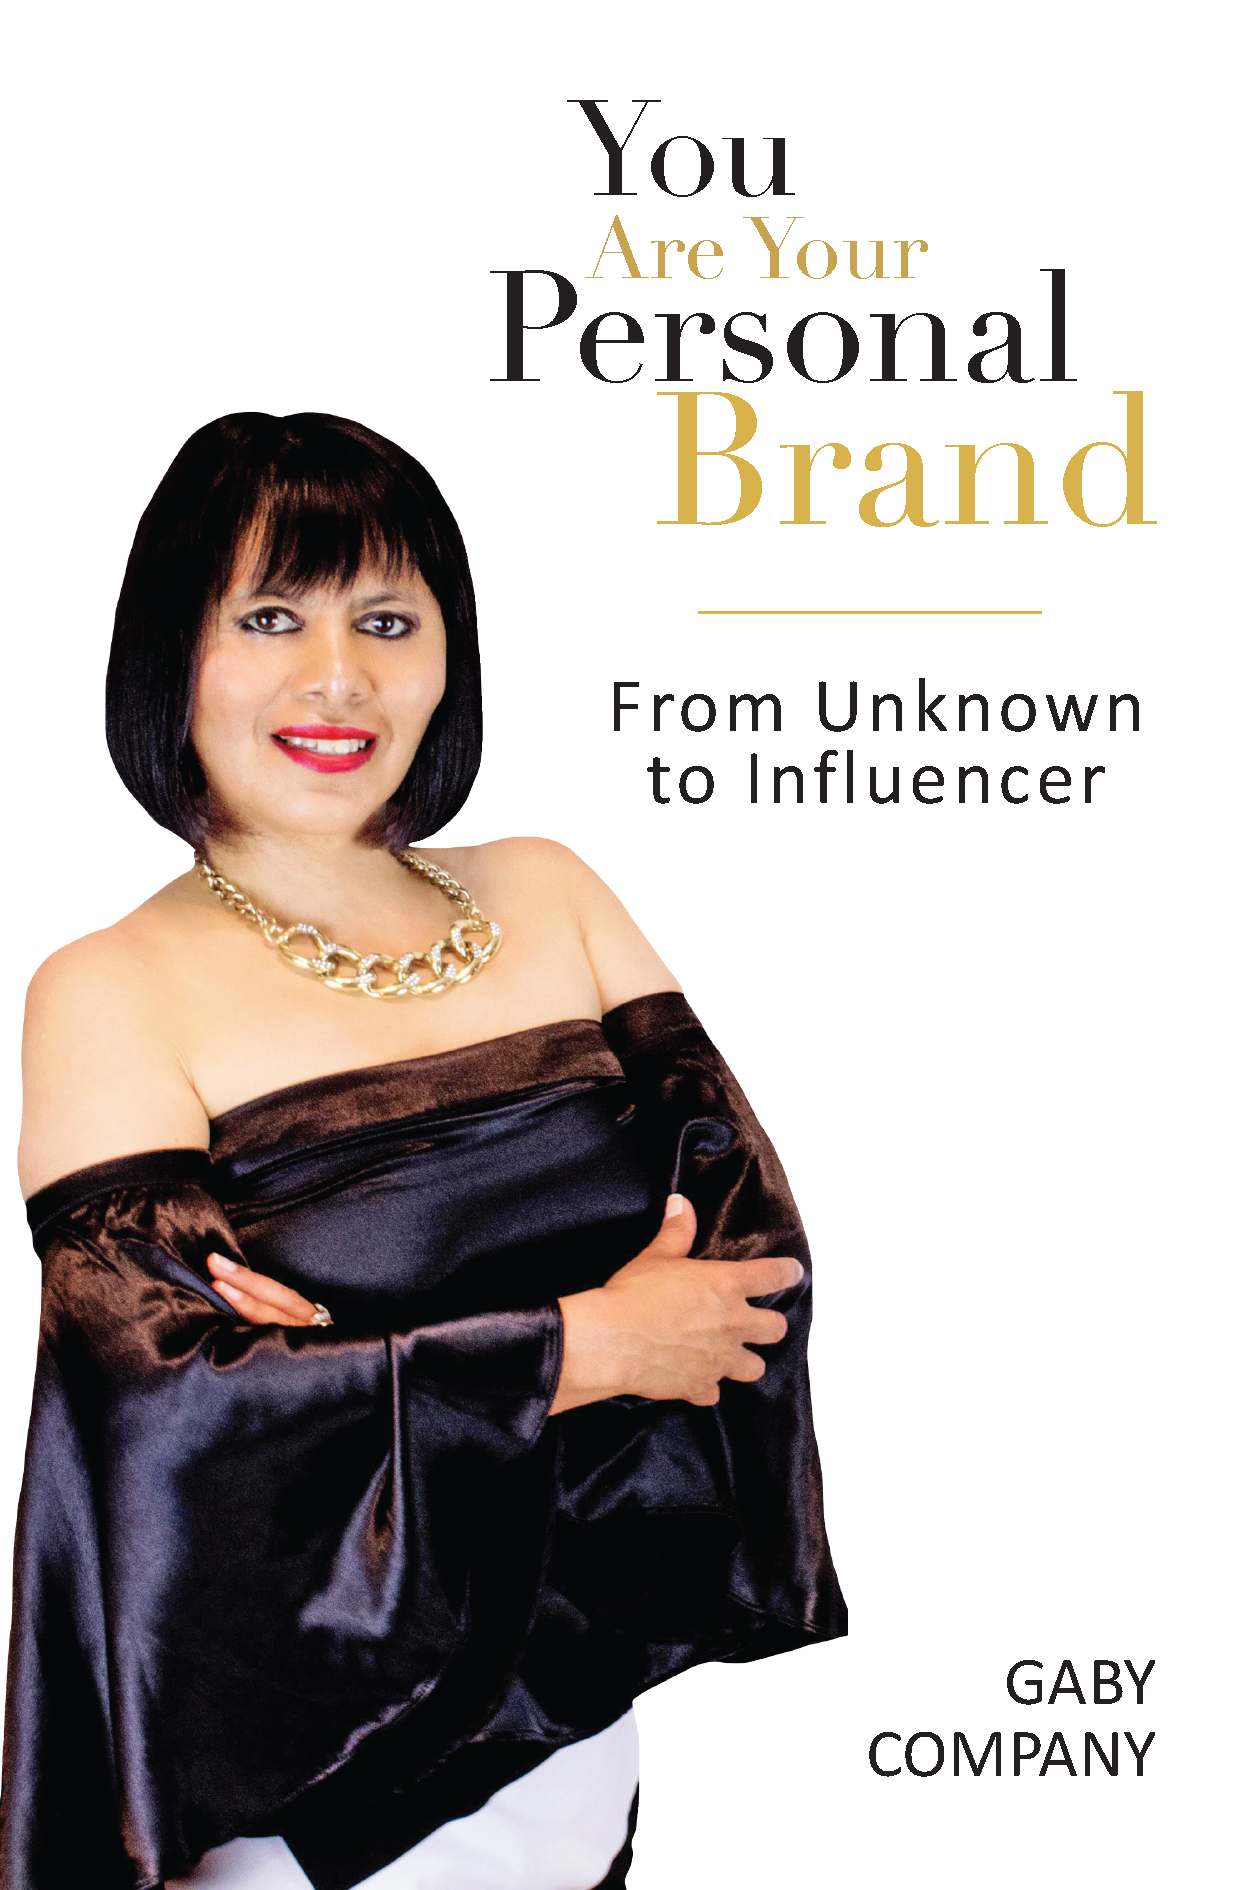 YOU ARE YOUR PERSONAL BRAND